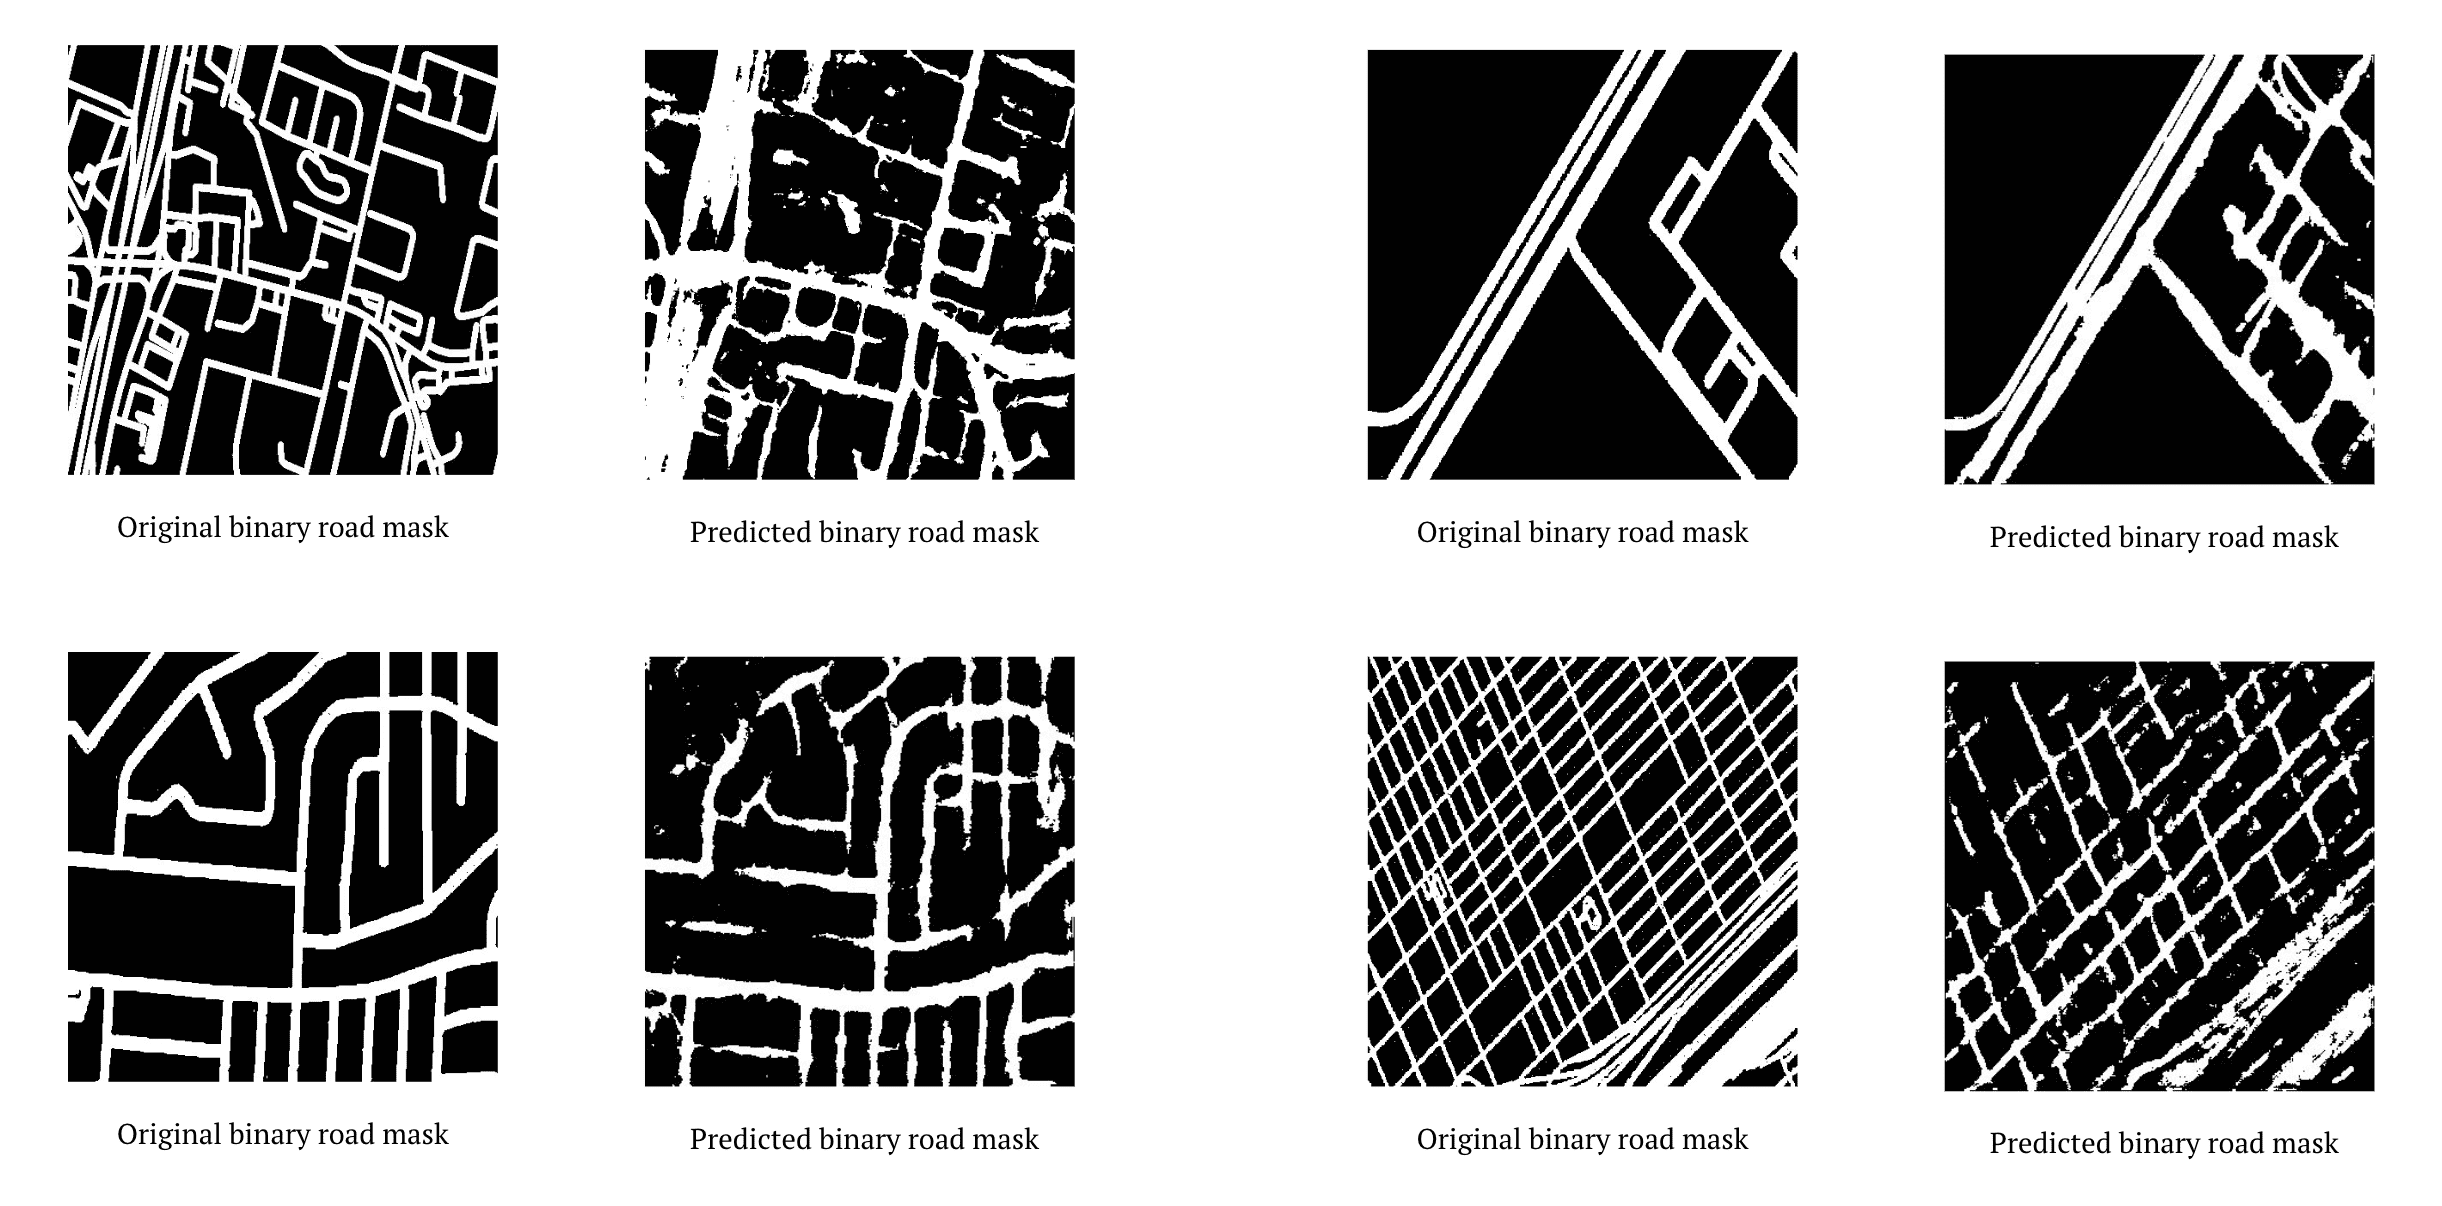 Original binary road masks compared to the predicted binary road masks. By Maria Alba from “A Novel Approach for Road Detection on Aerial Imagery.”